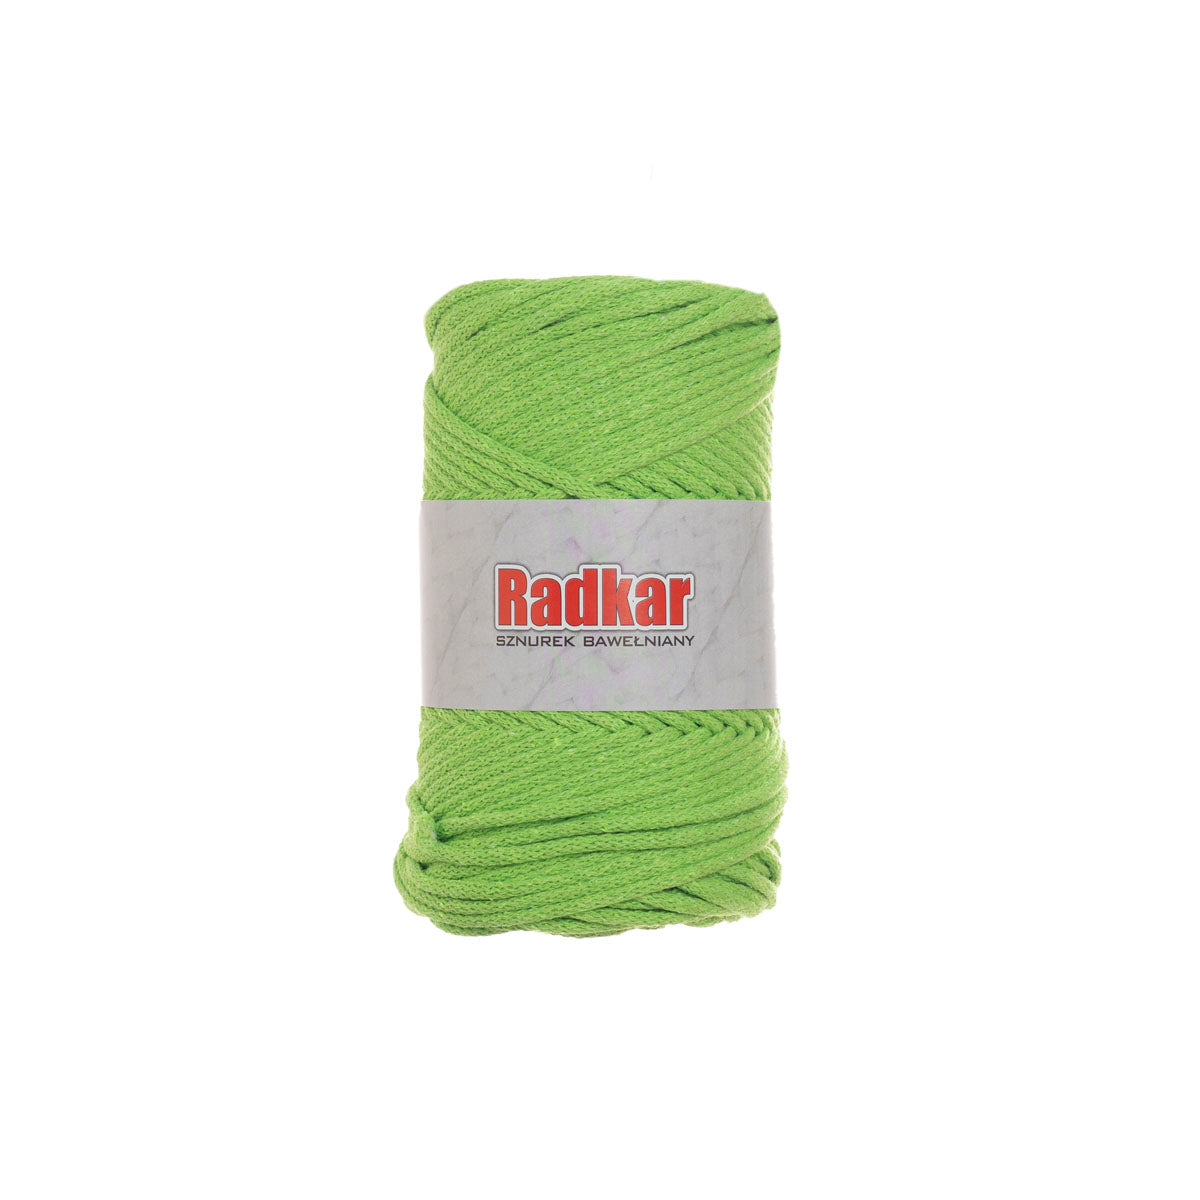 3mm cotto cord braided macrame lime crochet knitting craft